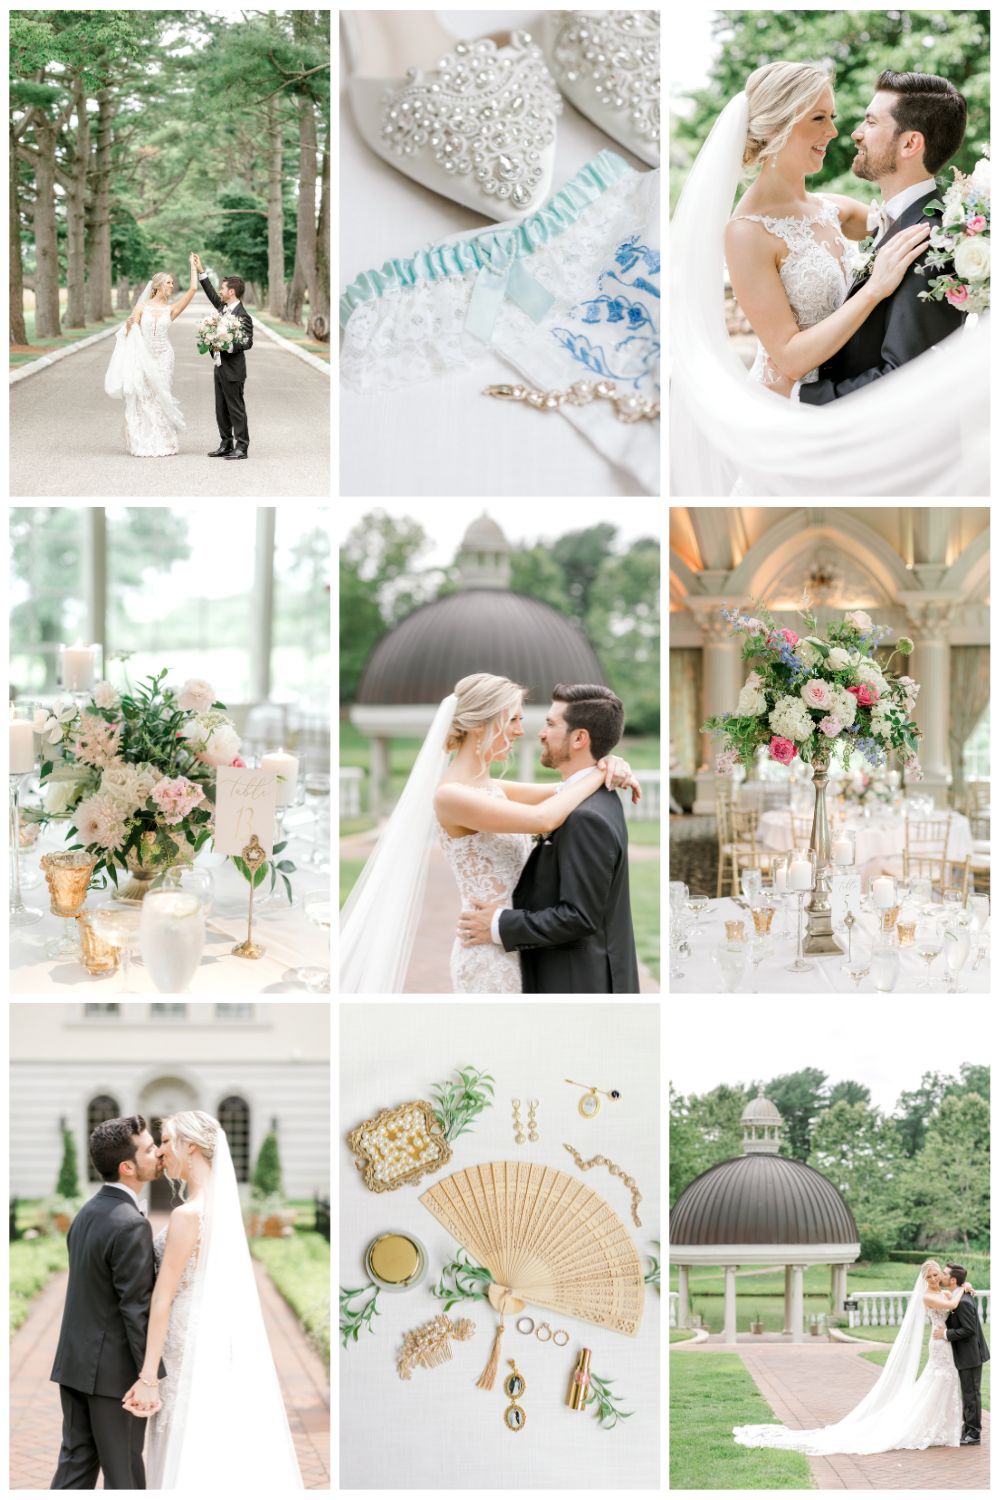 Romantic and classic Ashford Estate wedding day in the summer photographed by NJ wedding photographer Susan Elizabeth Photography